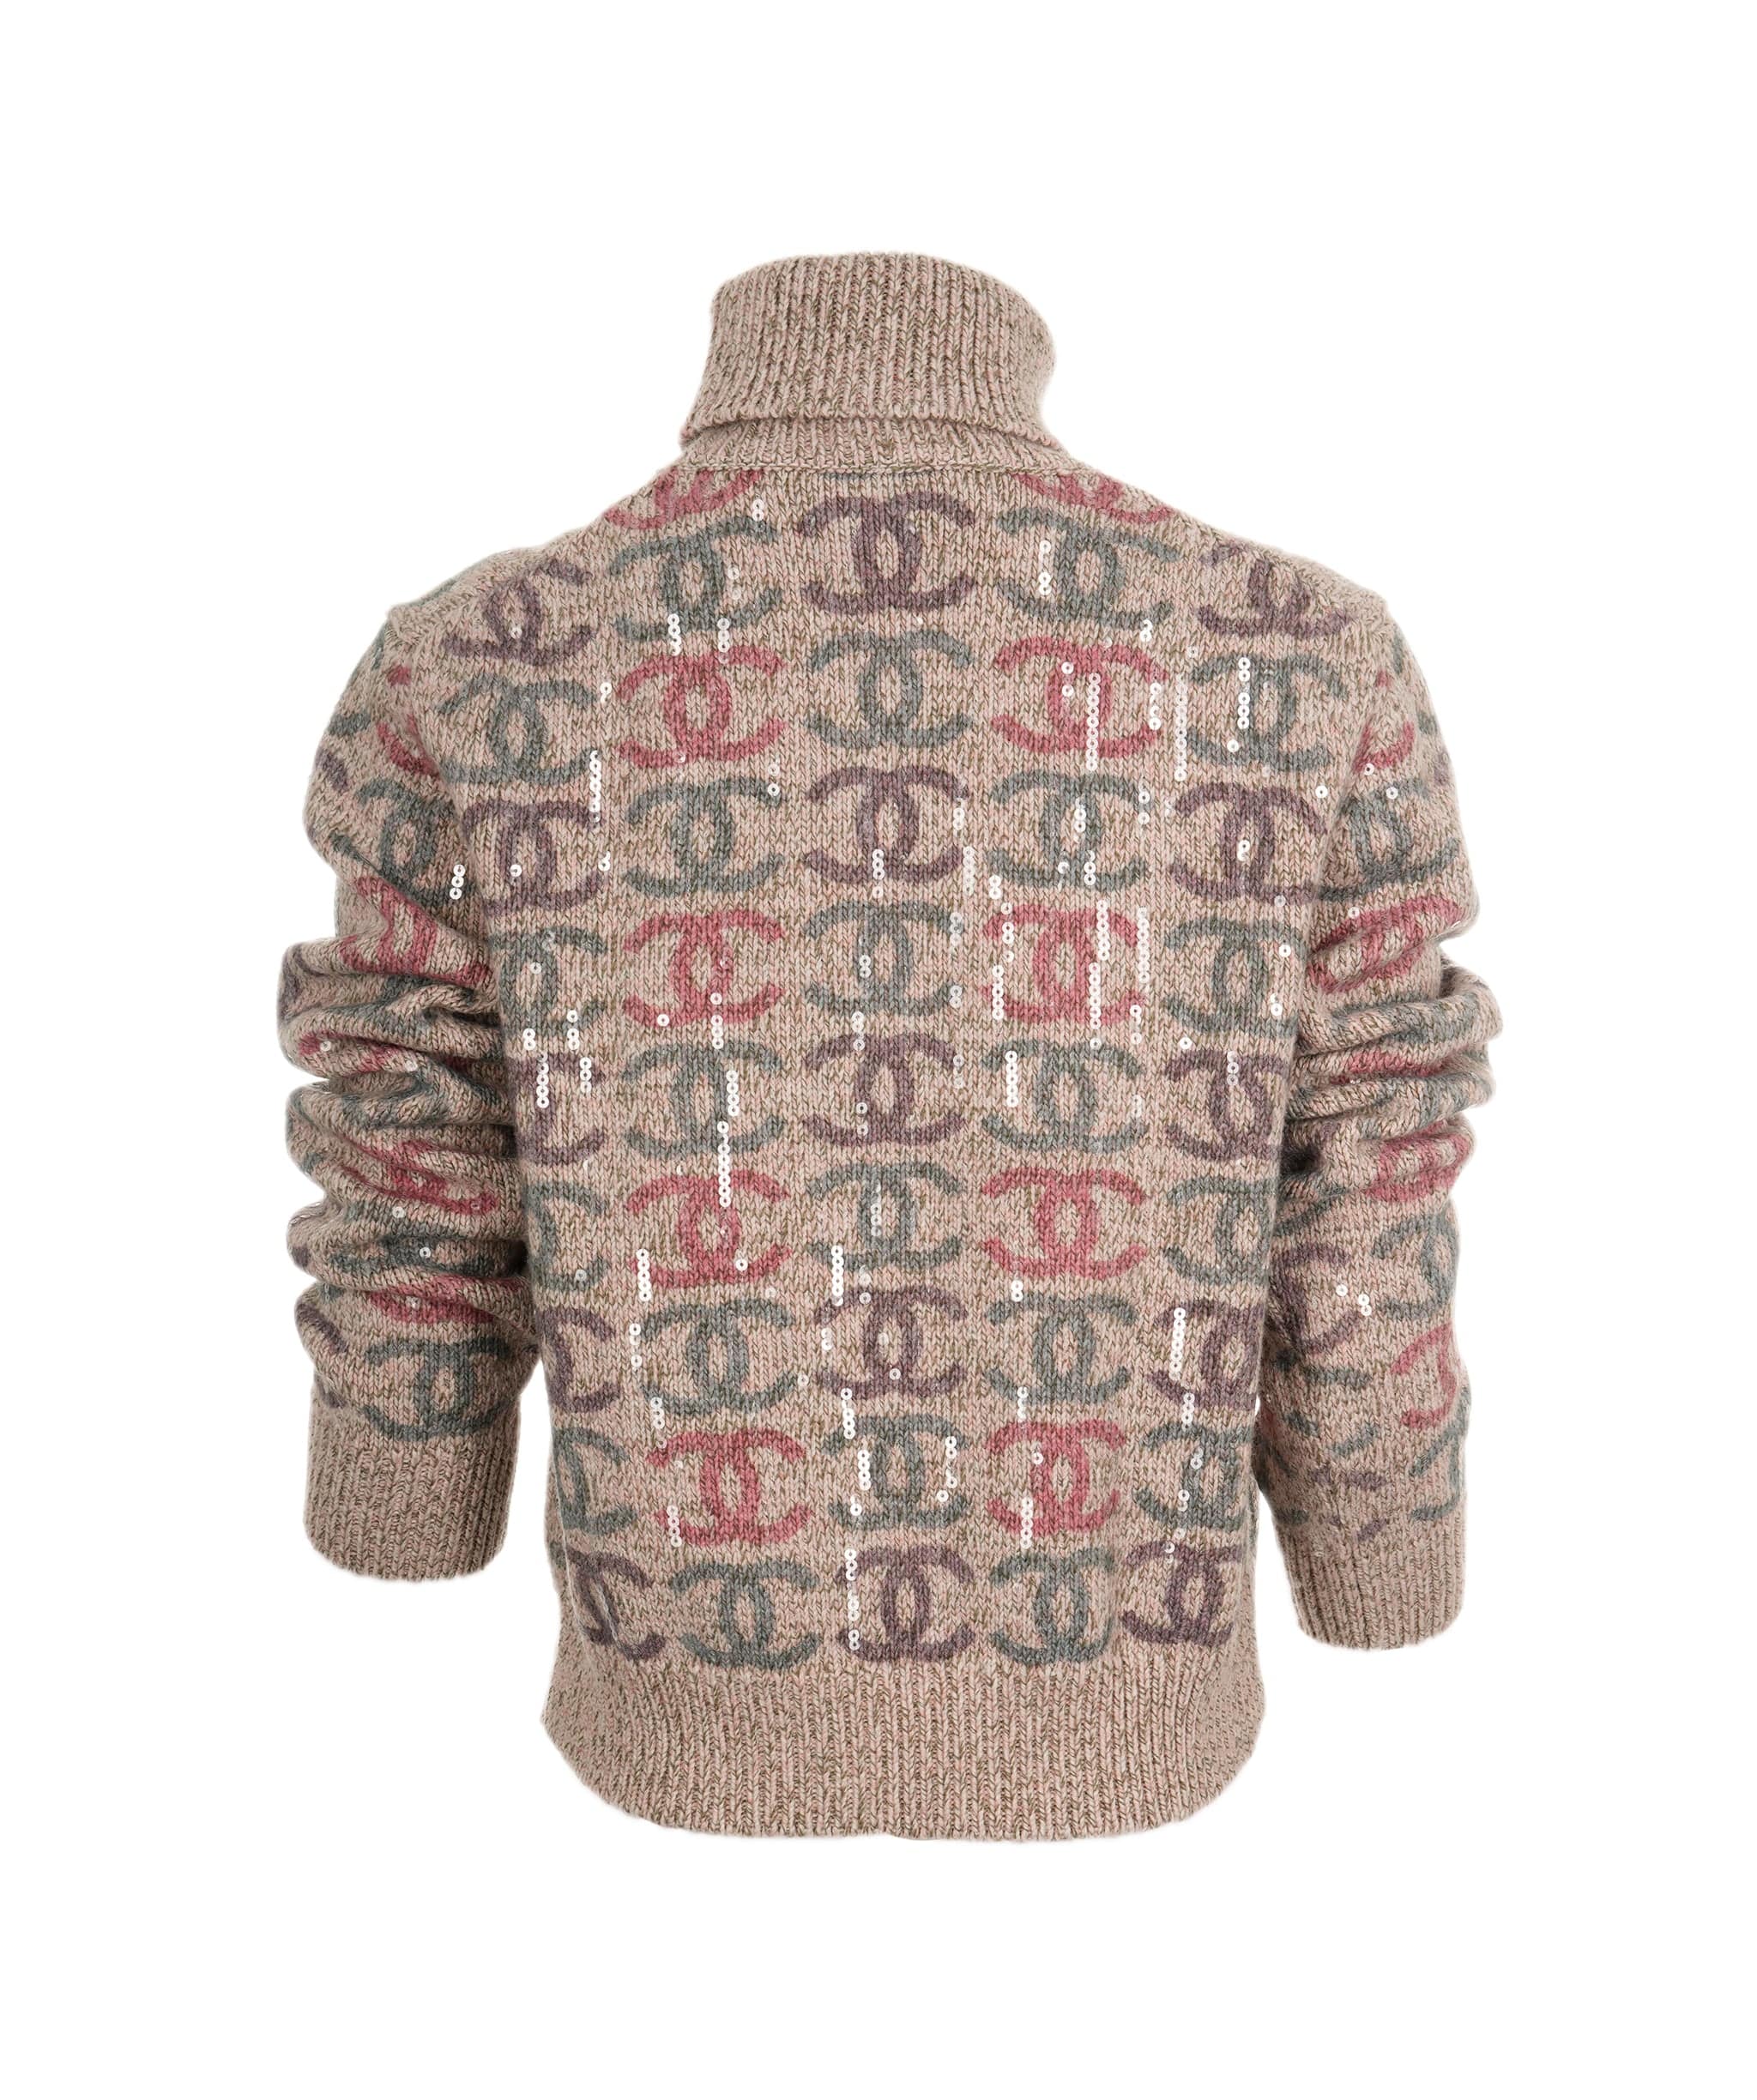 Chanel Pullover Chanel rose cc sequins FR38 P73877K10577 AVC1631